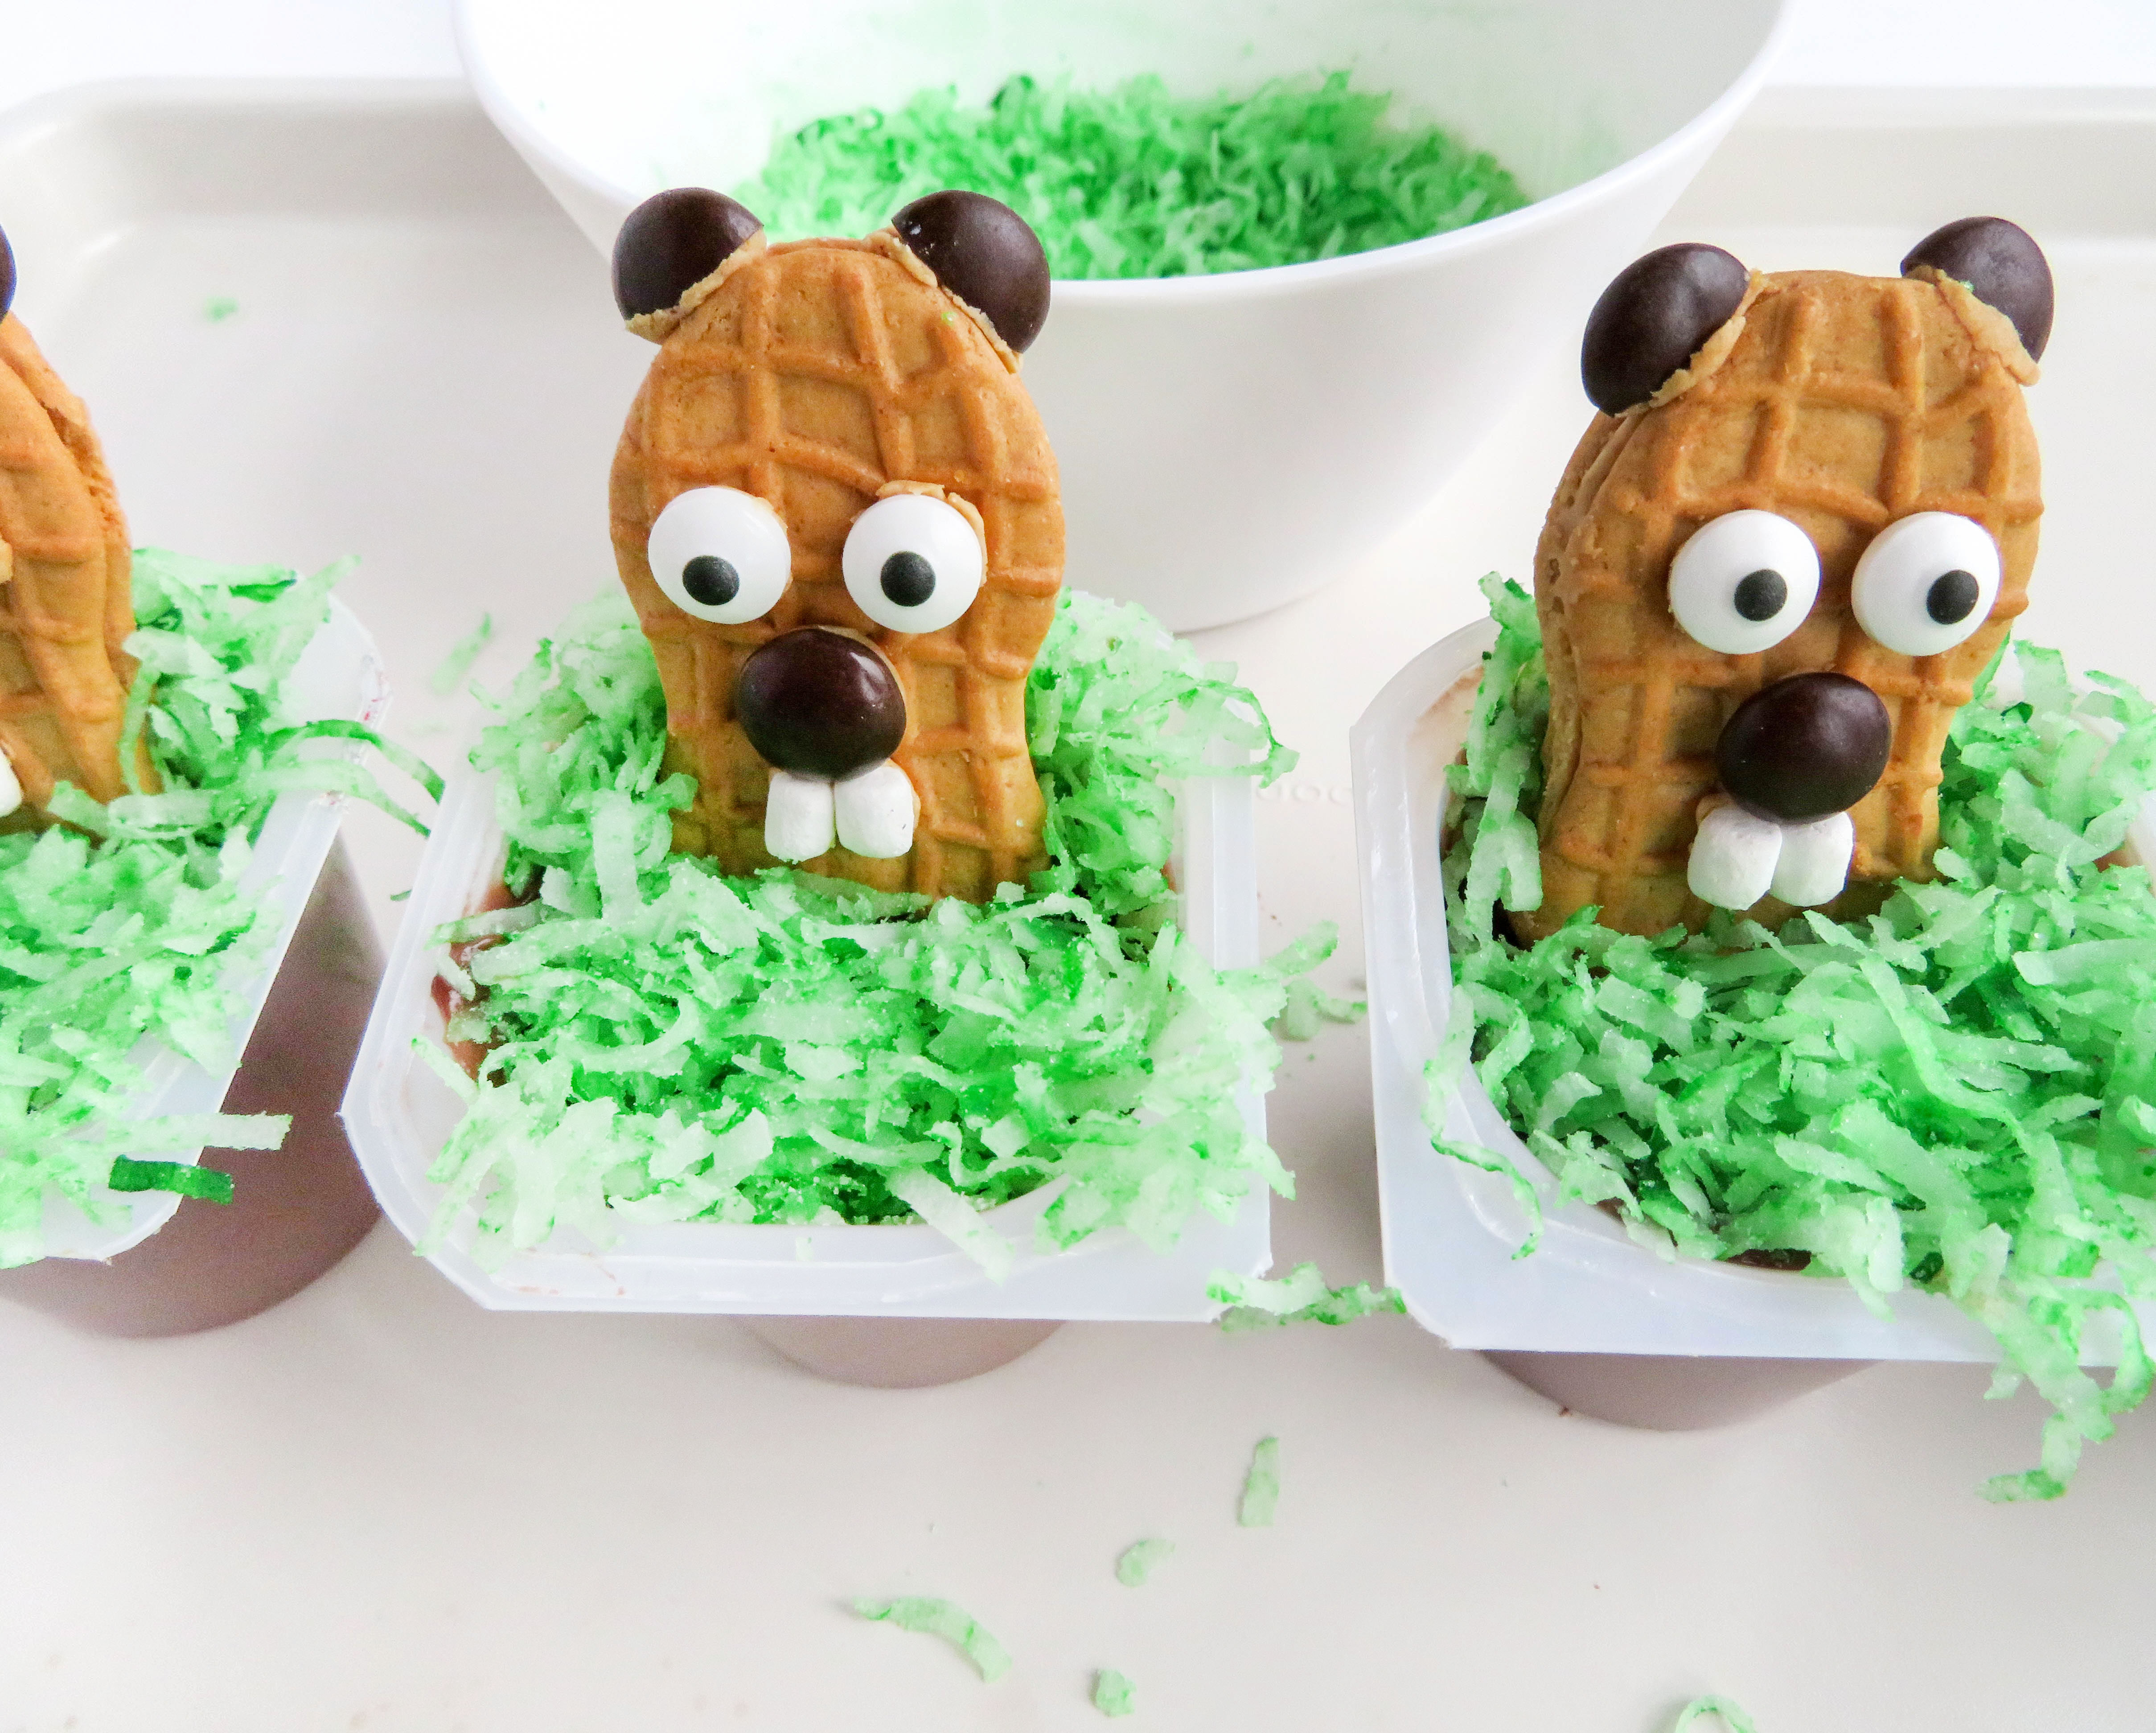 These HAPPY GROUNDHOG DAY PUDDING CUPS are the cutest for preschoolers and kindergarten kids! The kids will love to eat these Punxsutawney Phil Nutter Butter treats! | OHMY-CREATIVE.COM